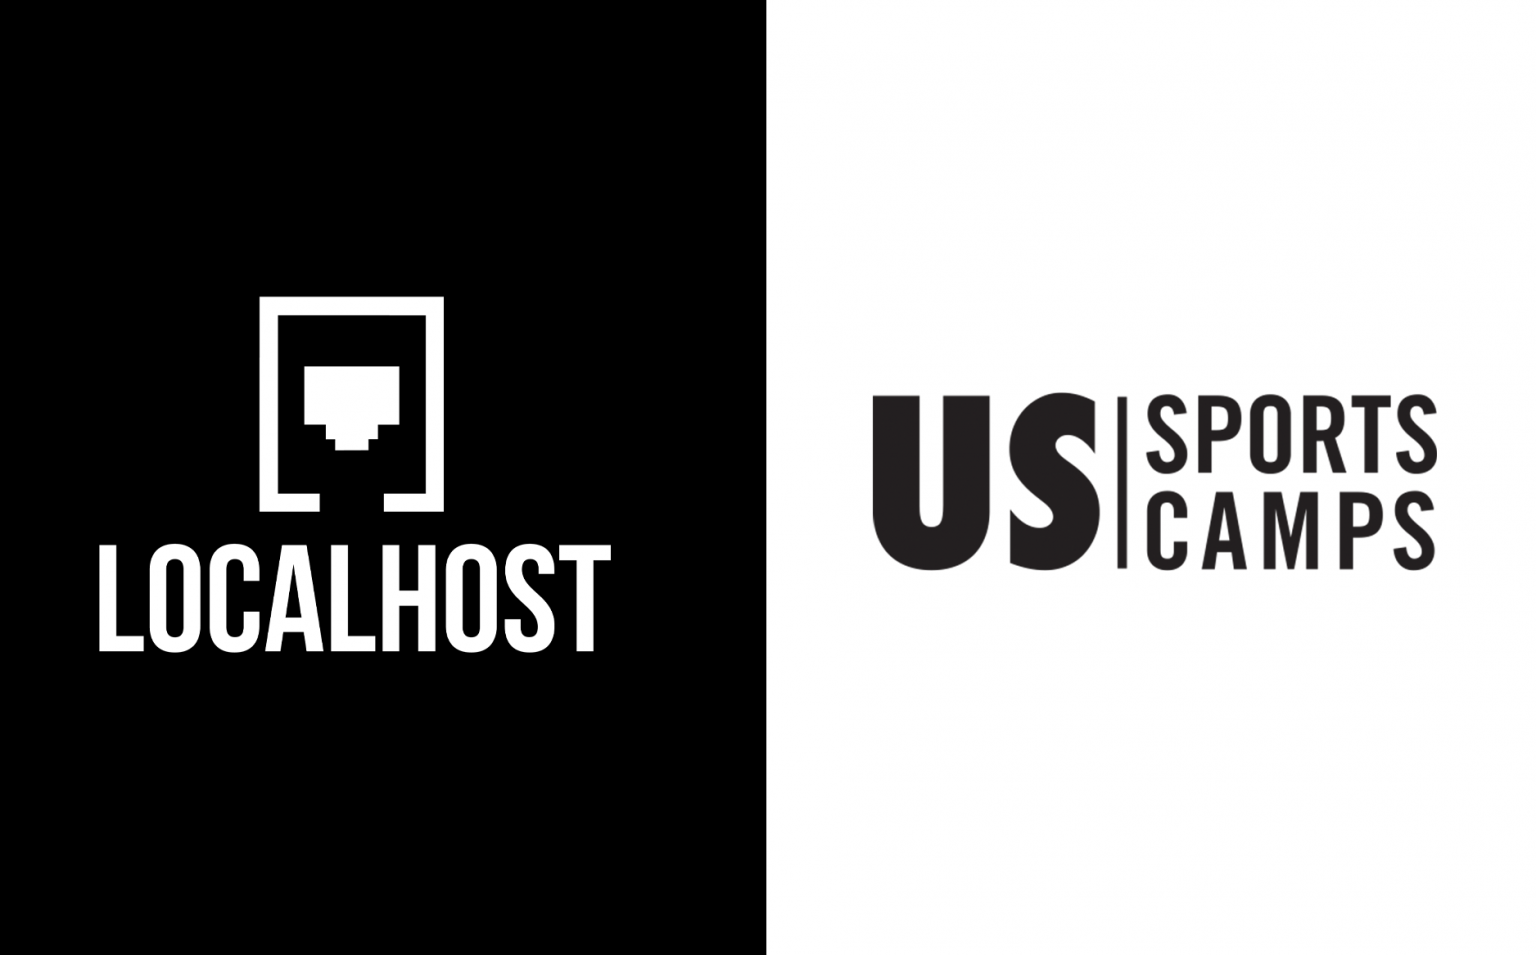 US Sports Camps and Nerd Street Gamers launch Localhost esports camps